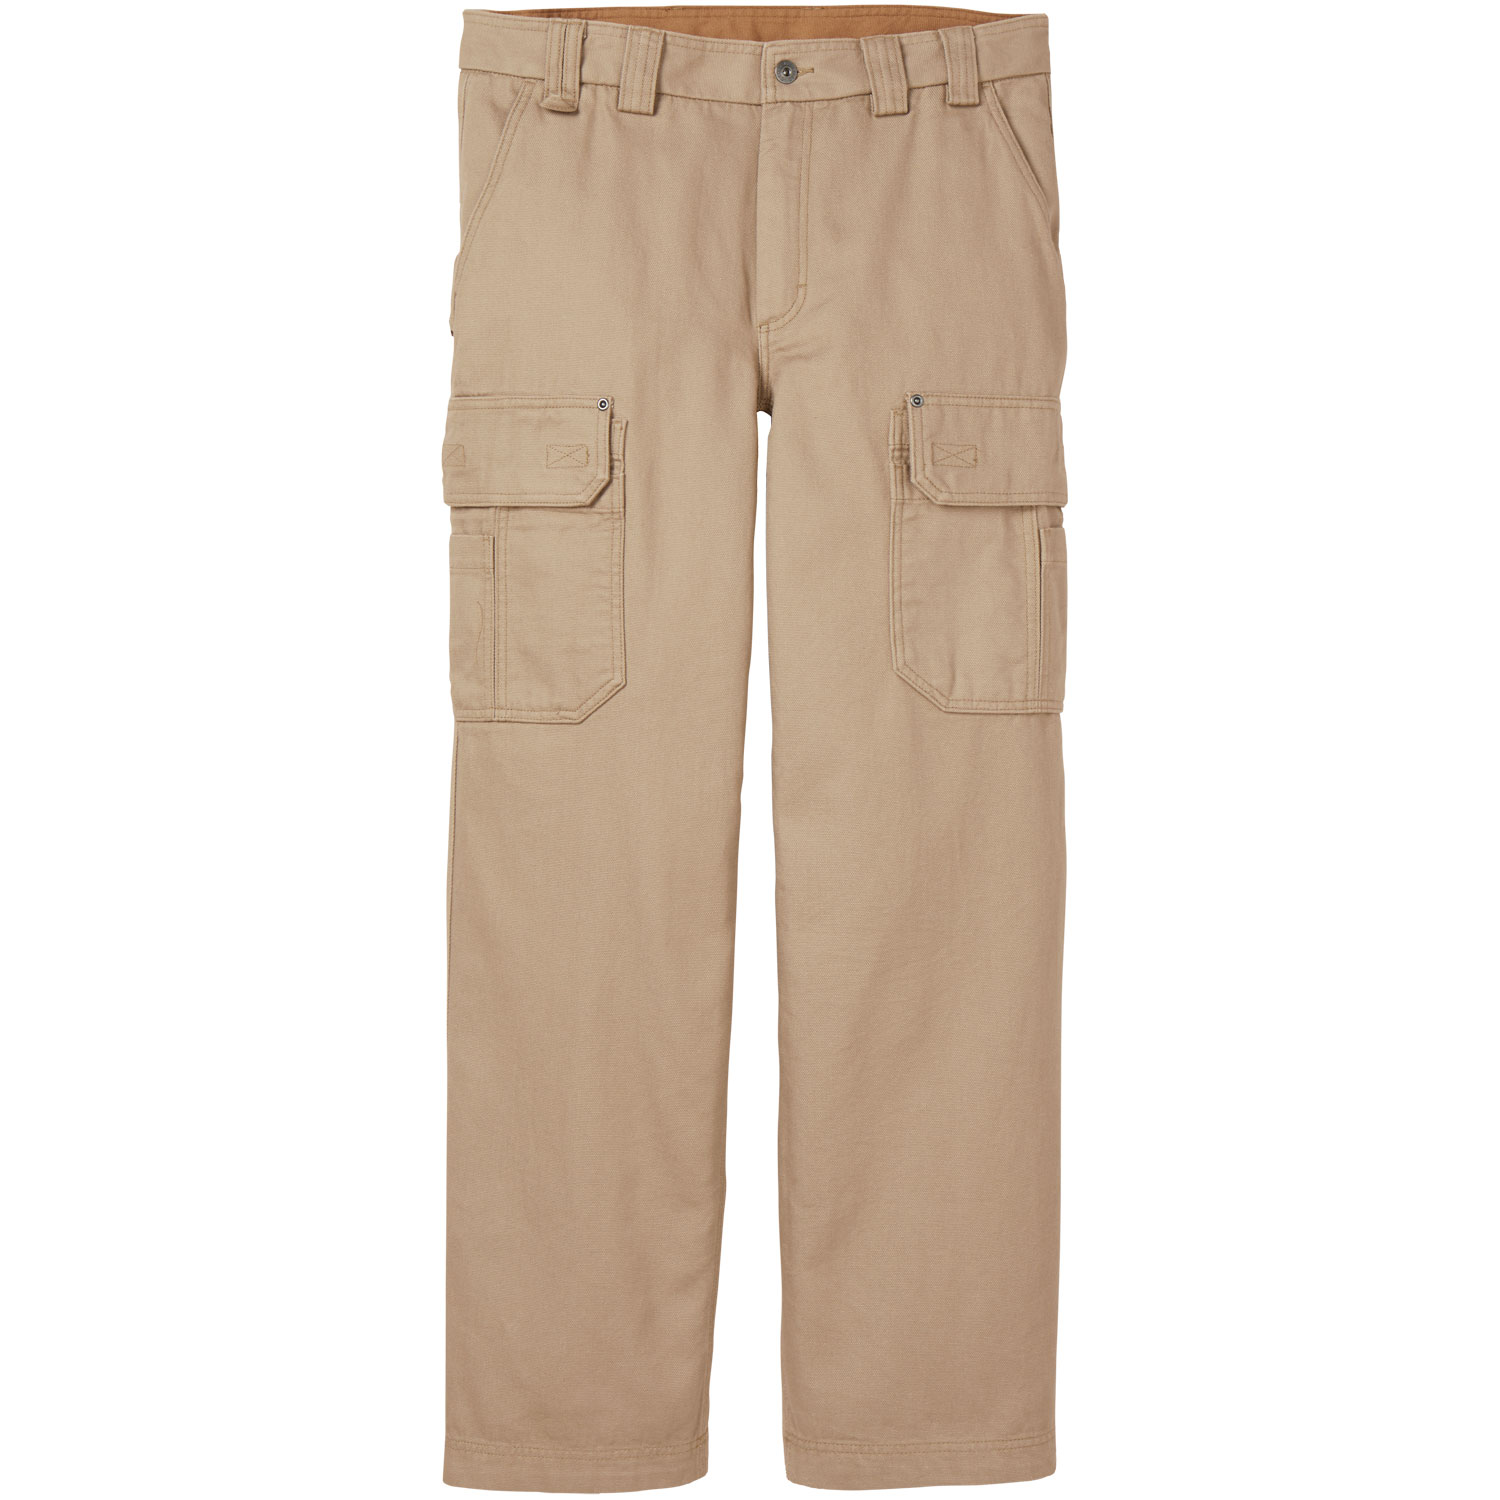 Mens Work Trousers Ireland- Low Prices – MTN Shop EU